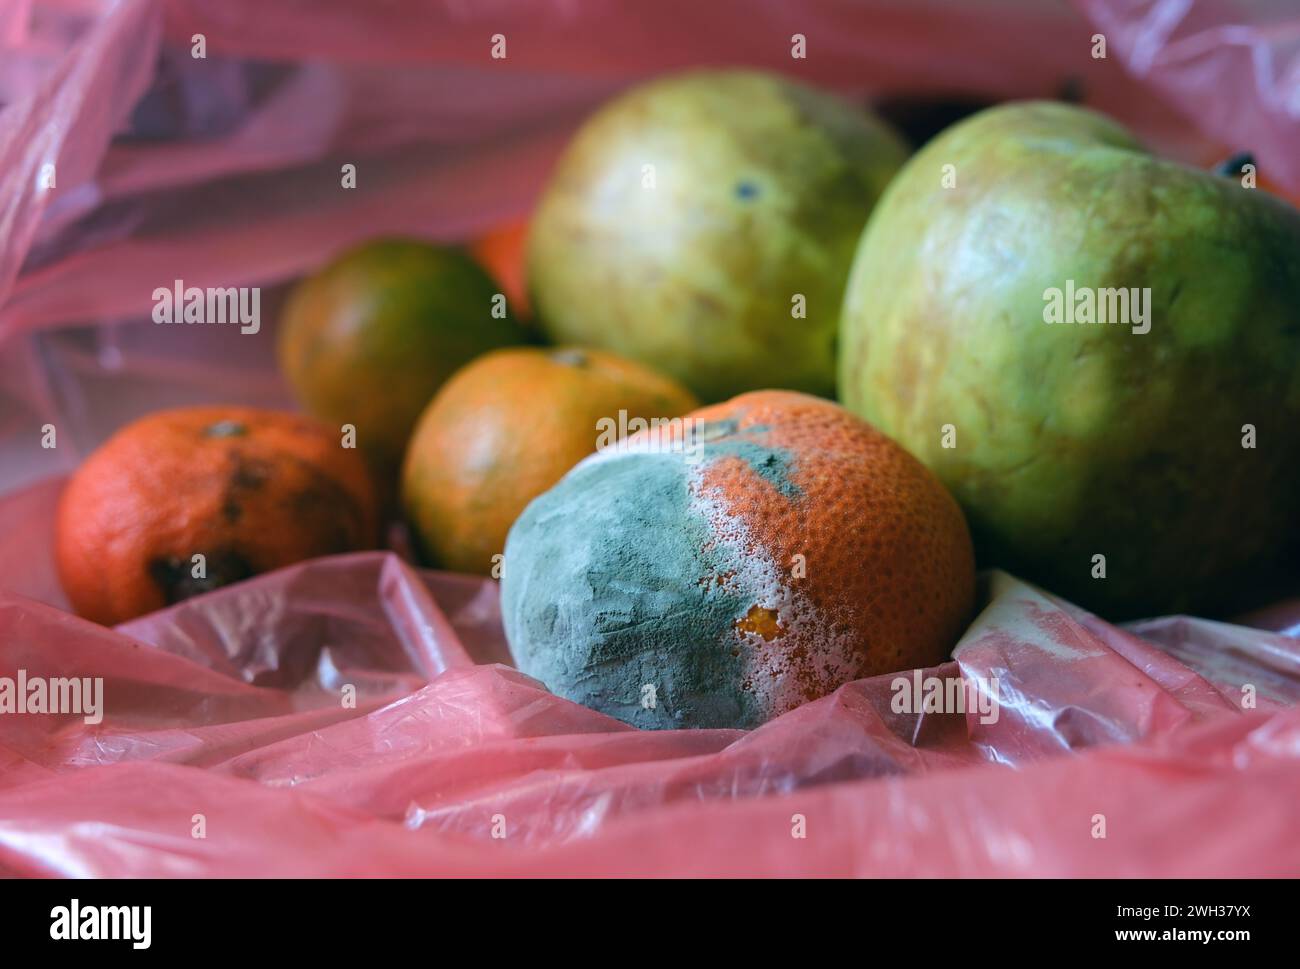 Moldy fruit. Mouldy tangerine. Fruits that are inedible and should be thrown away. Stock Photo